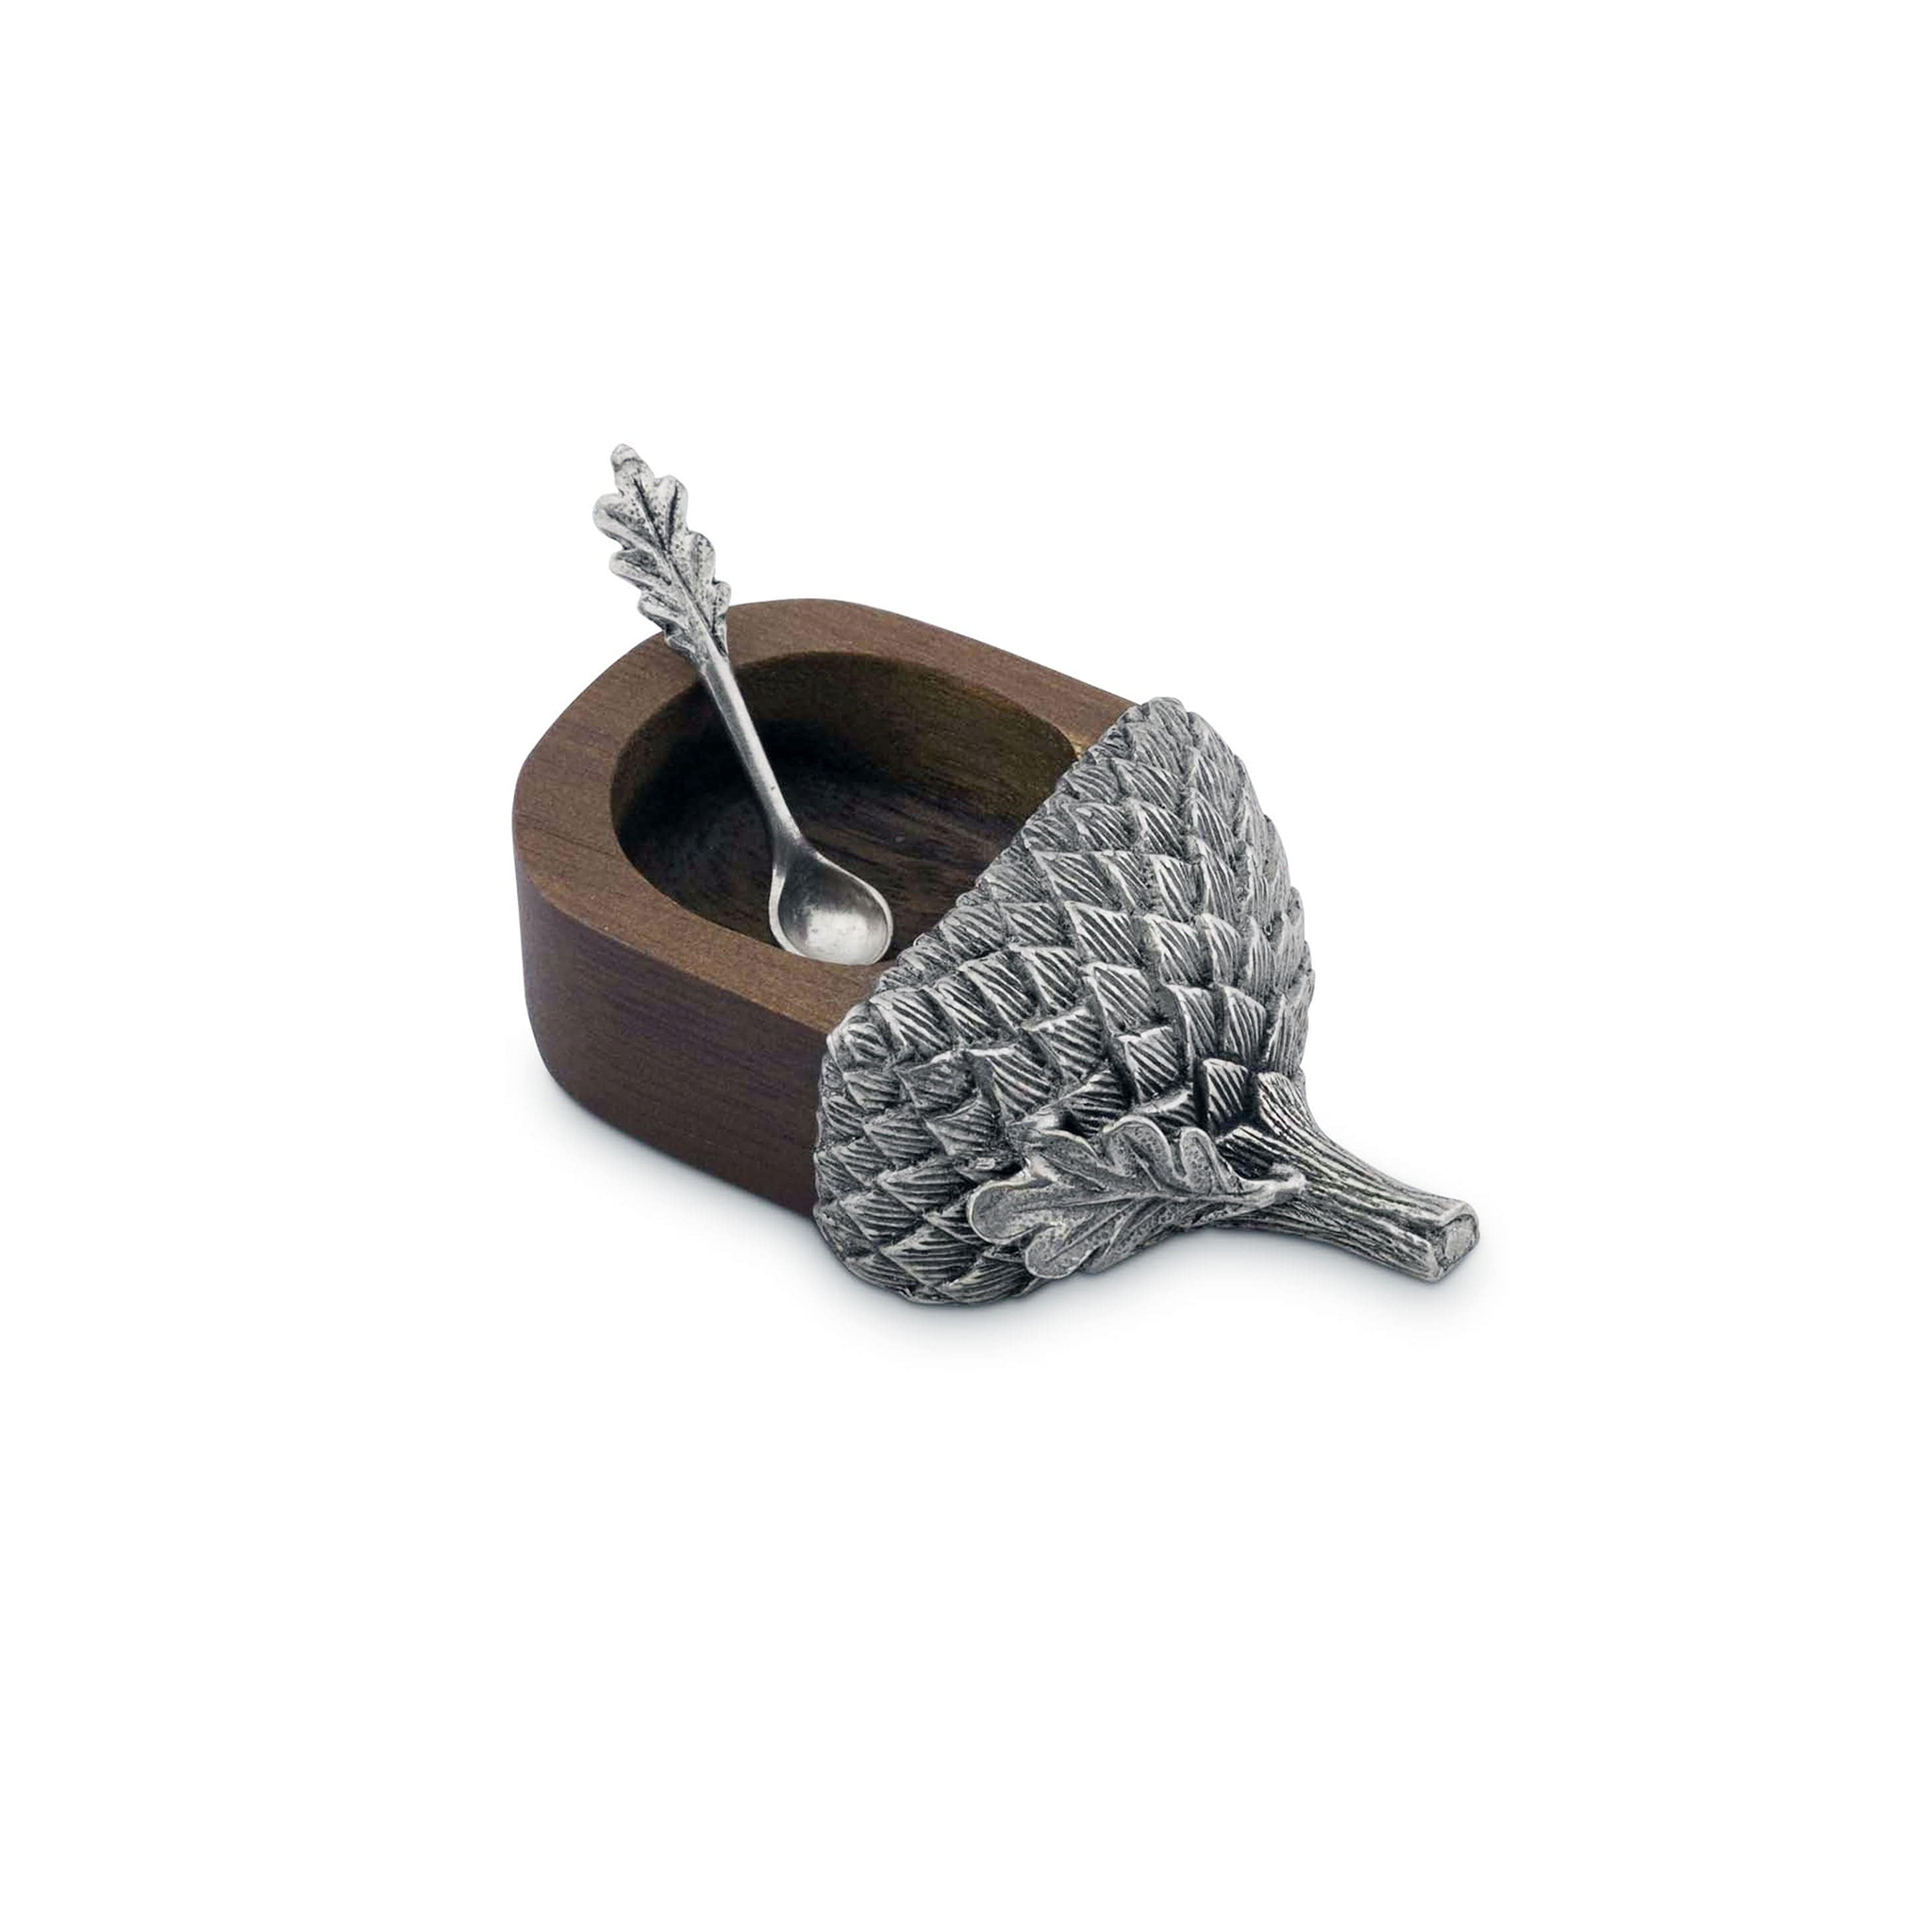 a small wooden acorn salt cellar with a silver spoon in it with a pewter cap on it on a white background